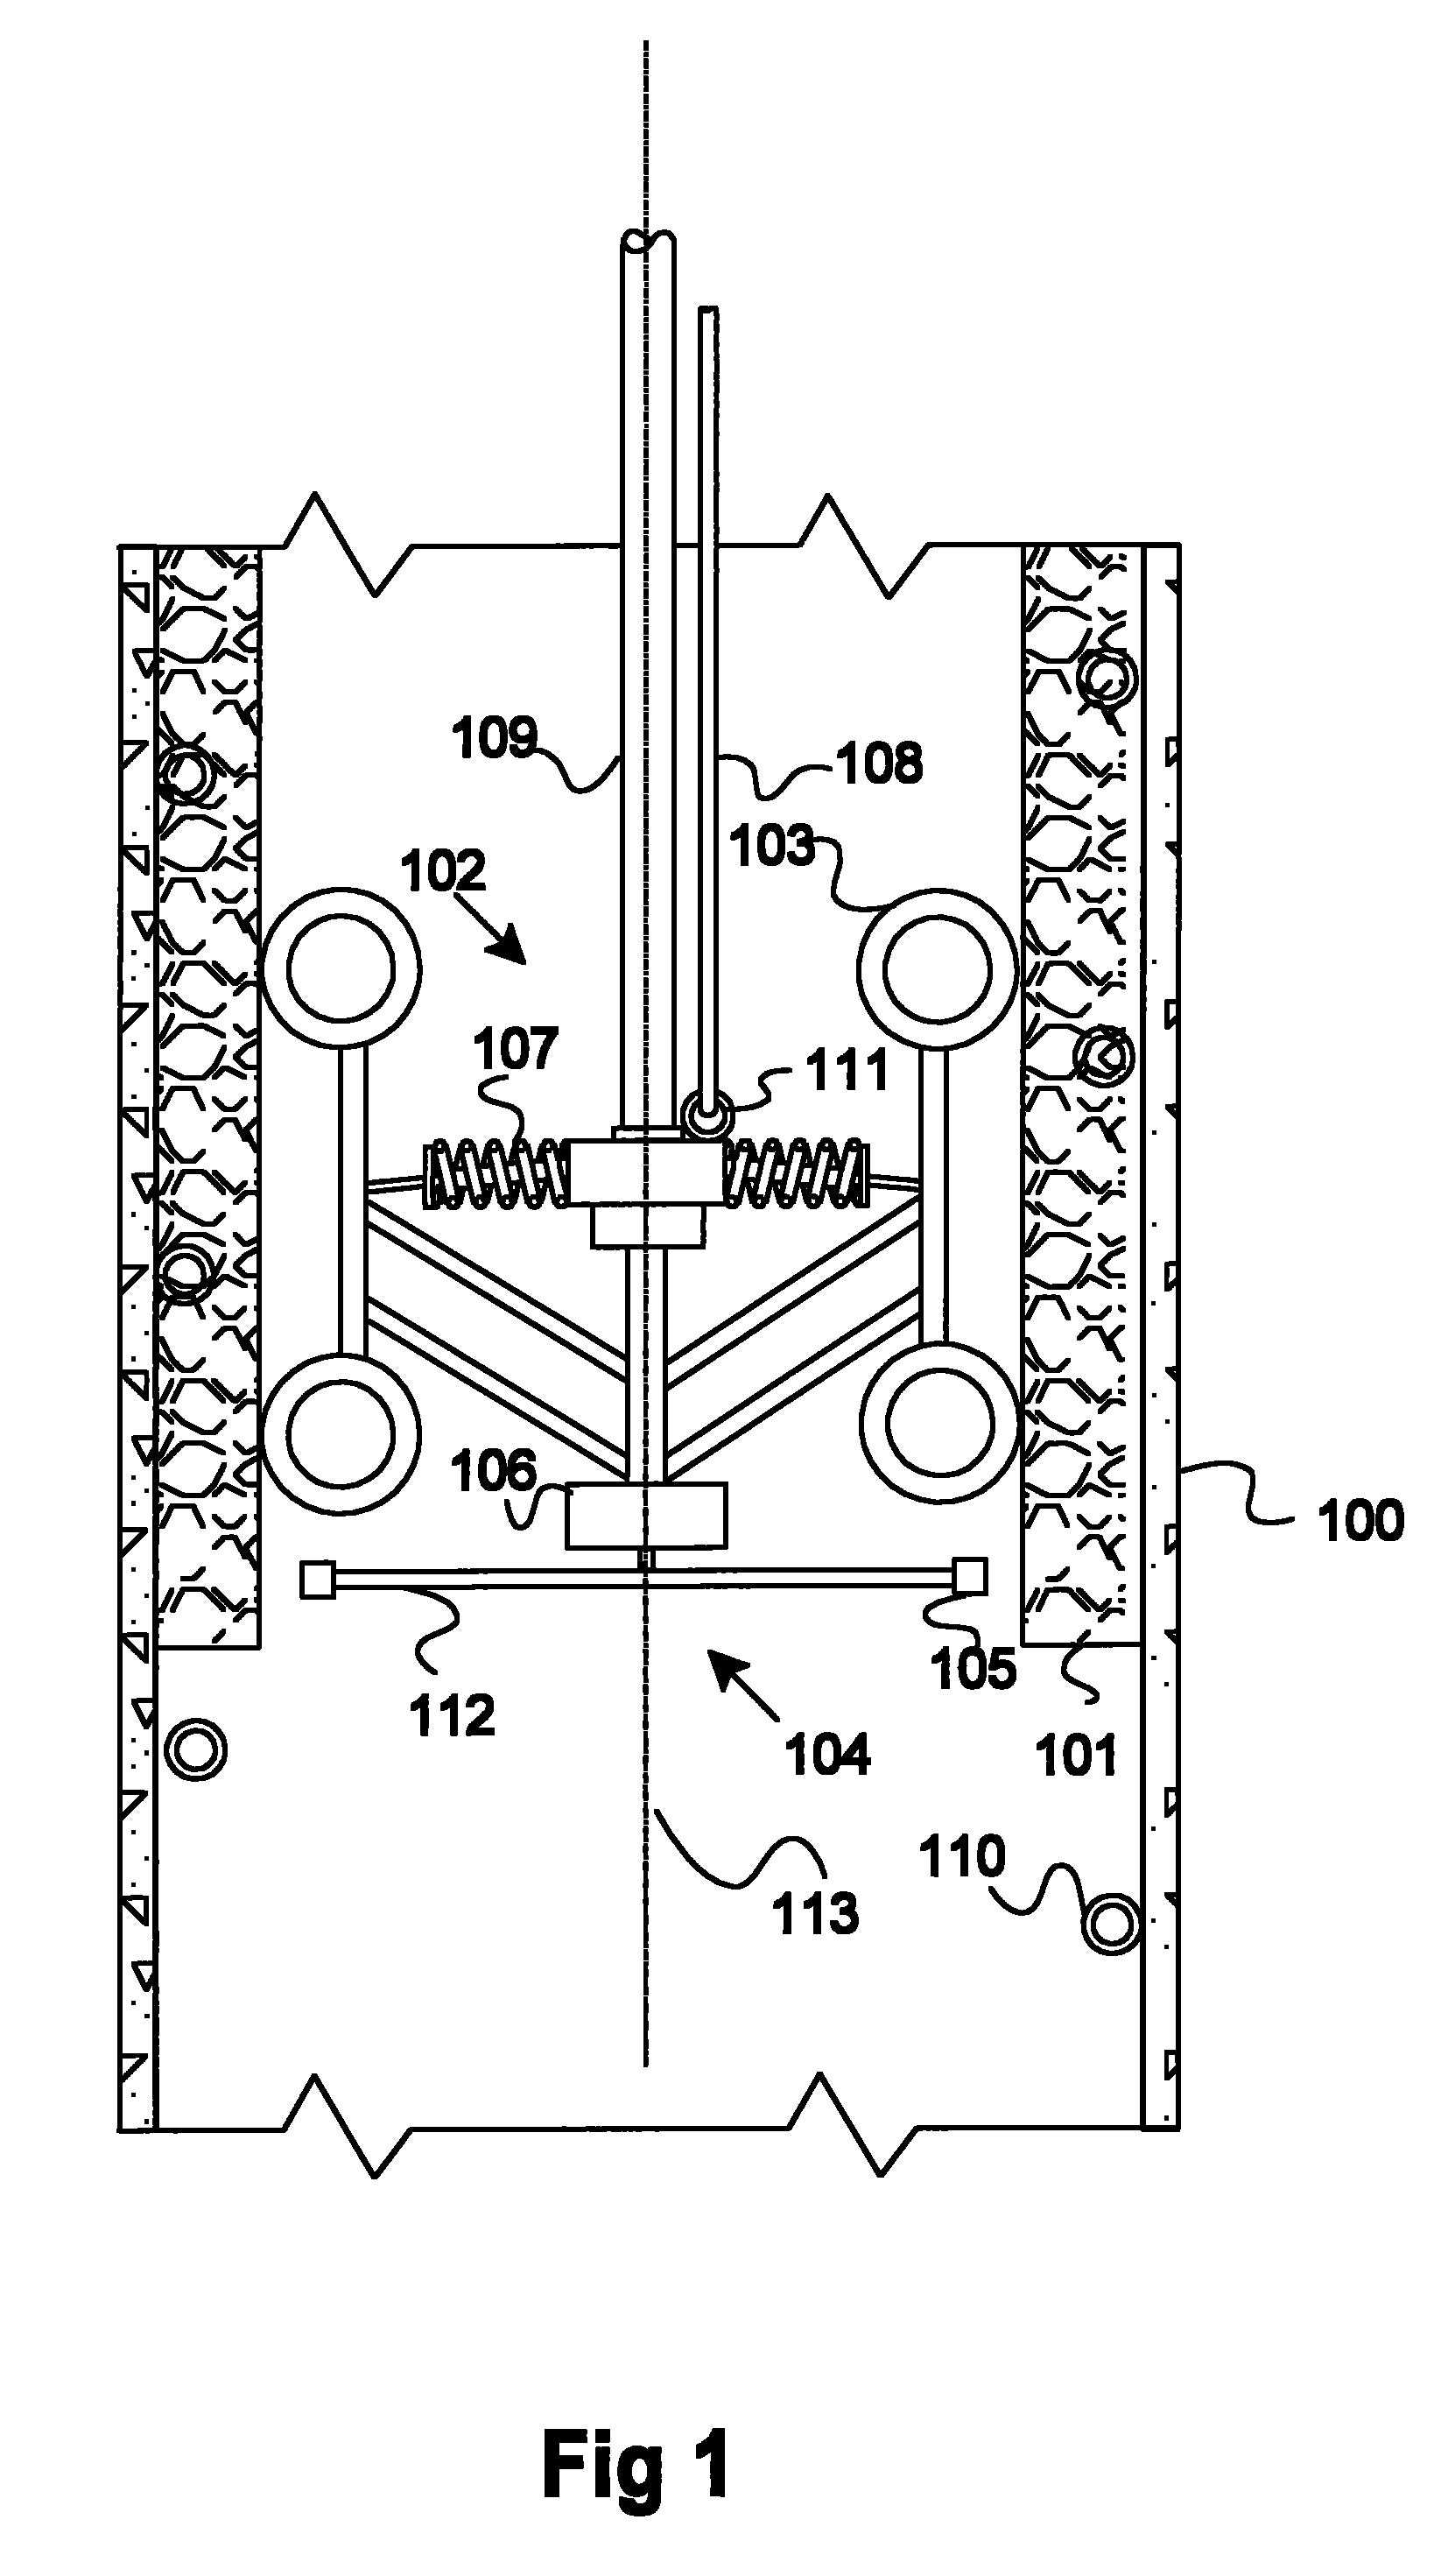 Refractory material removal system and method